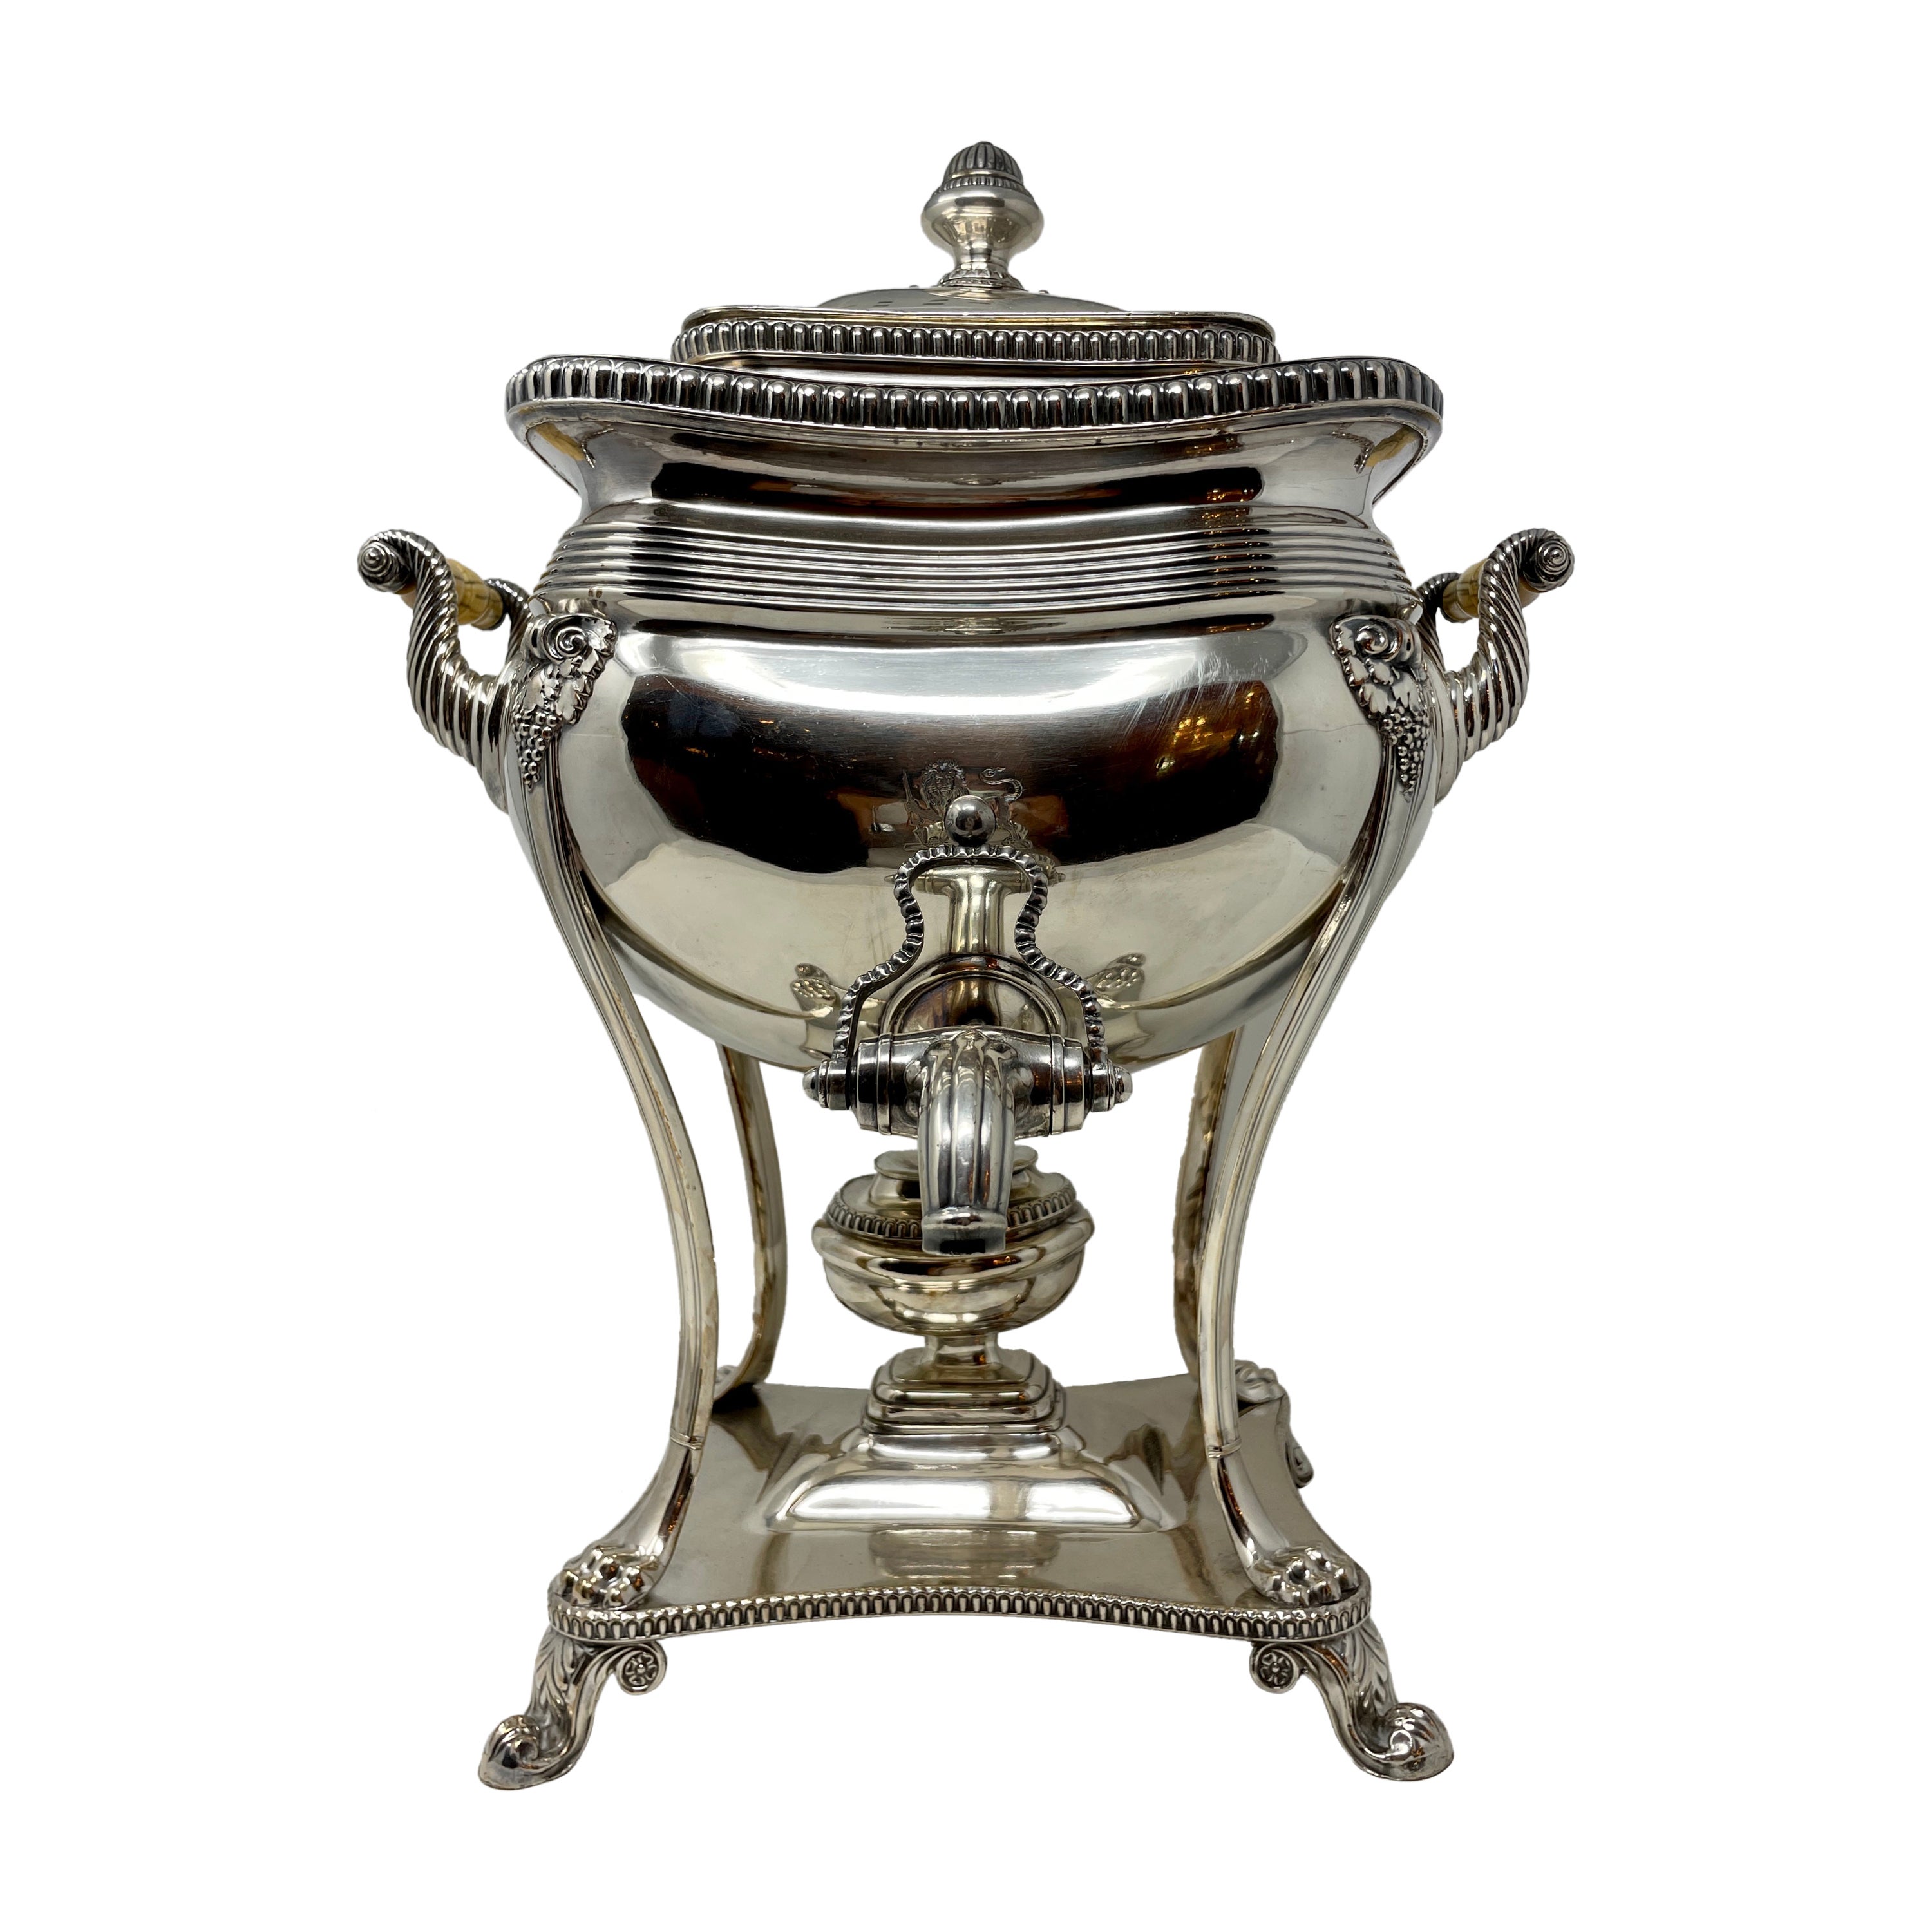 Antique English Sheffield Silver-Plated Hot Water Kettle, circa 1880